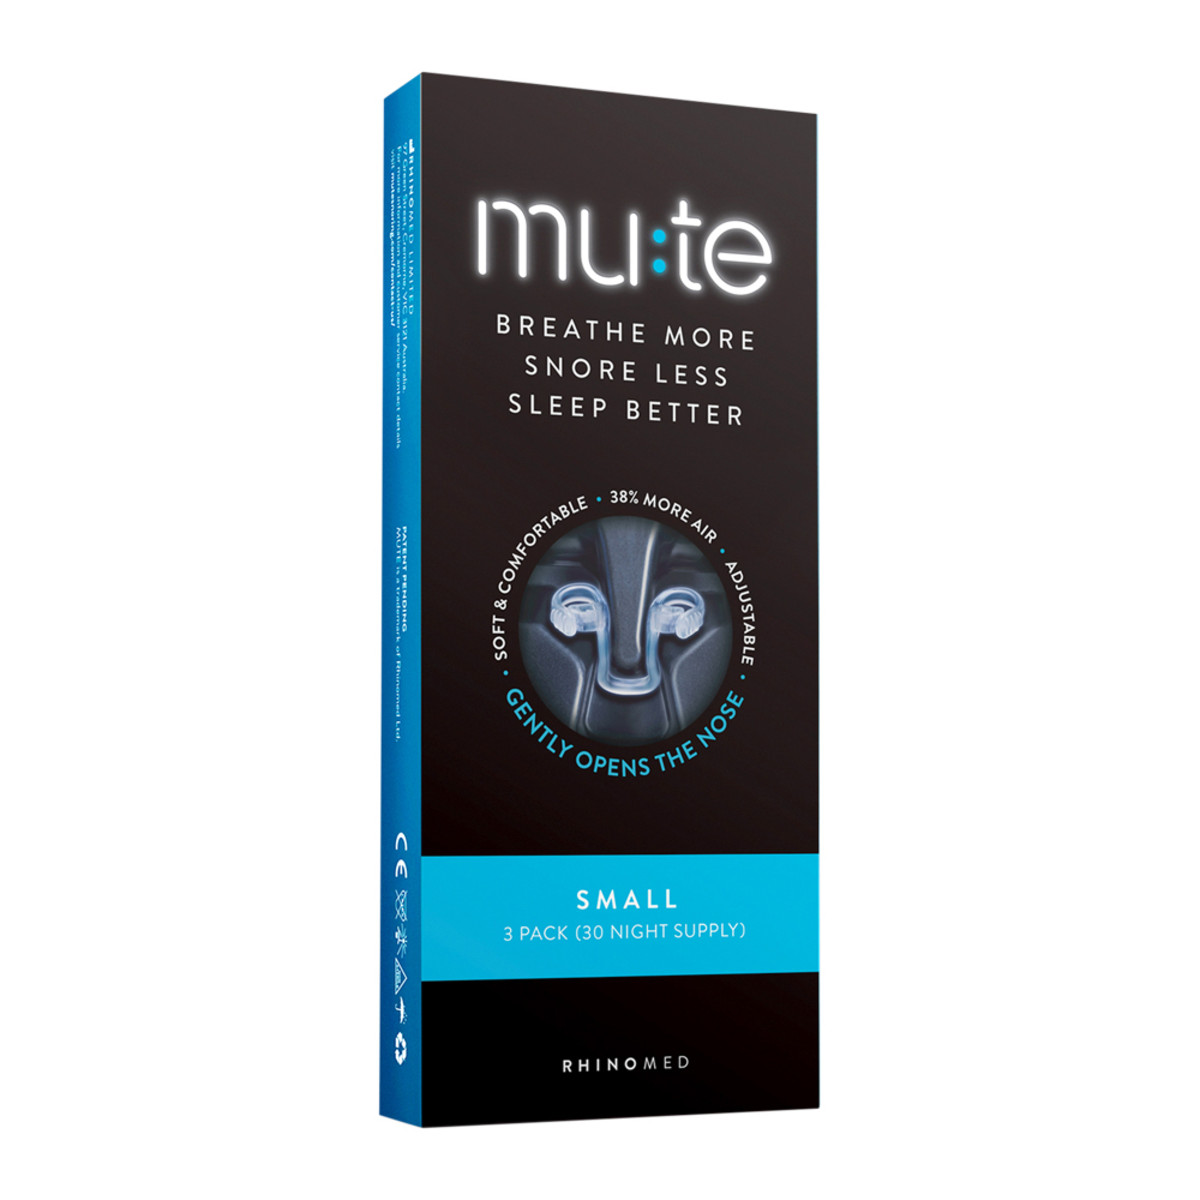 Rhinomed Mute (Breathe More, Snore Less, Sleep Better) Small x 3 Pack (30 night supply)